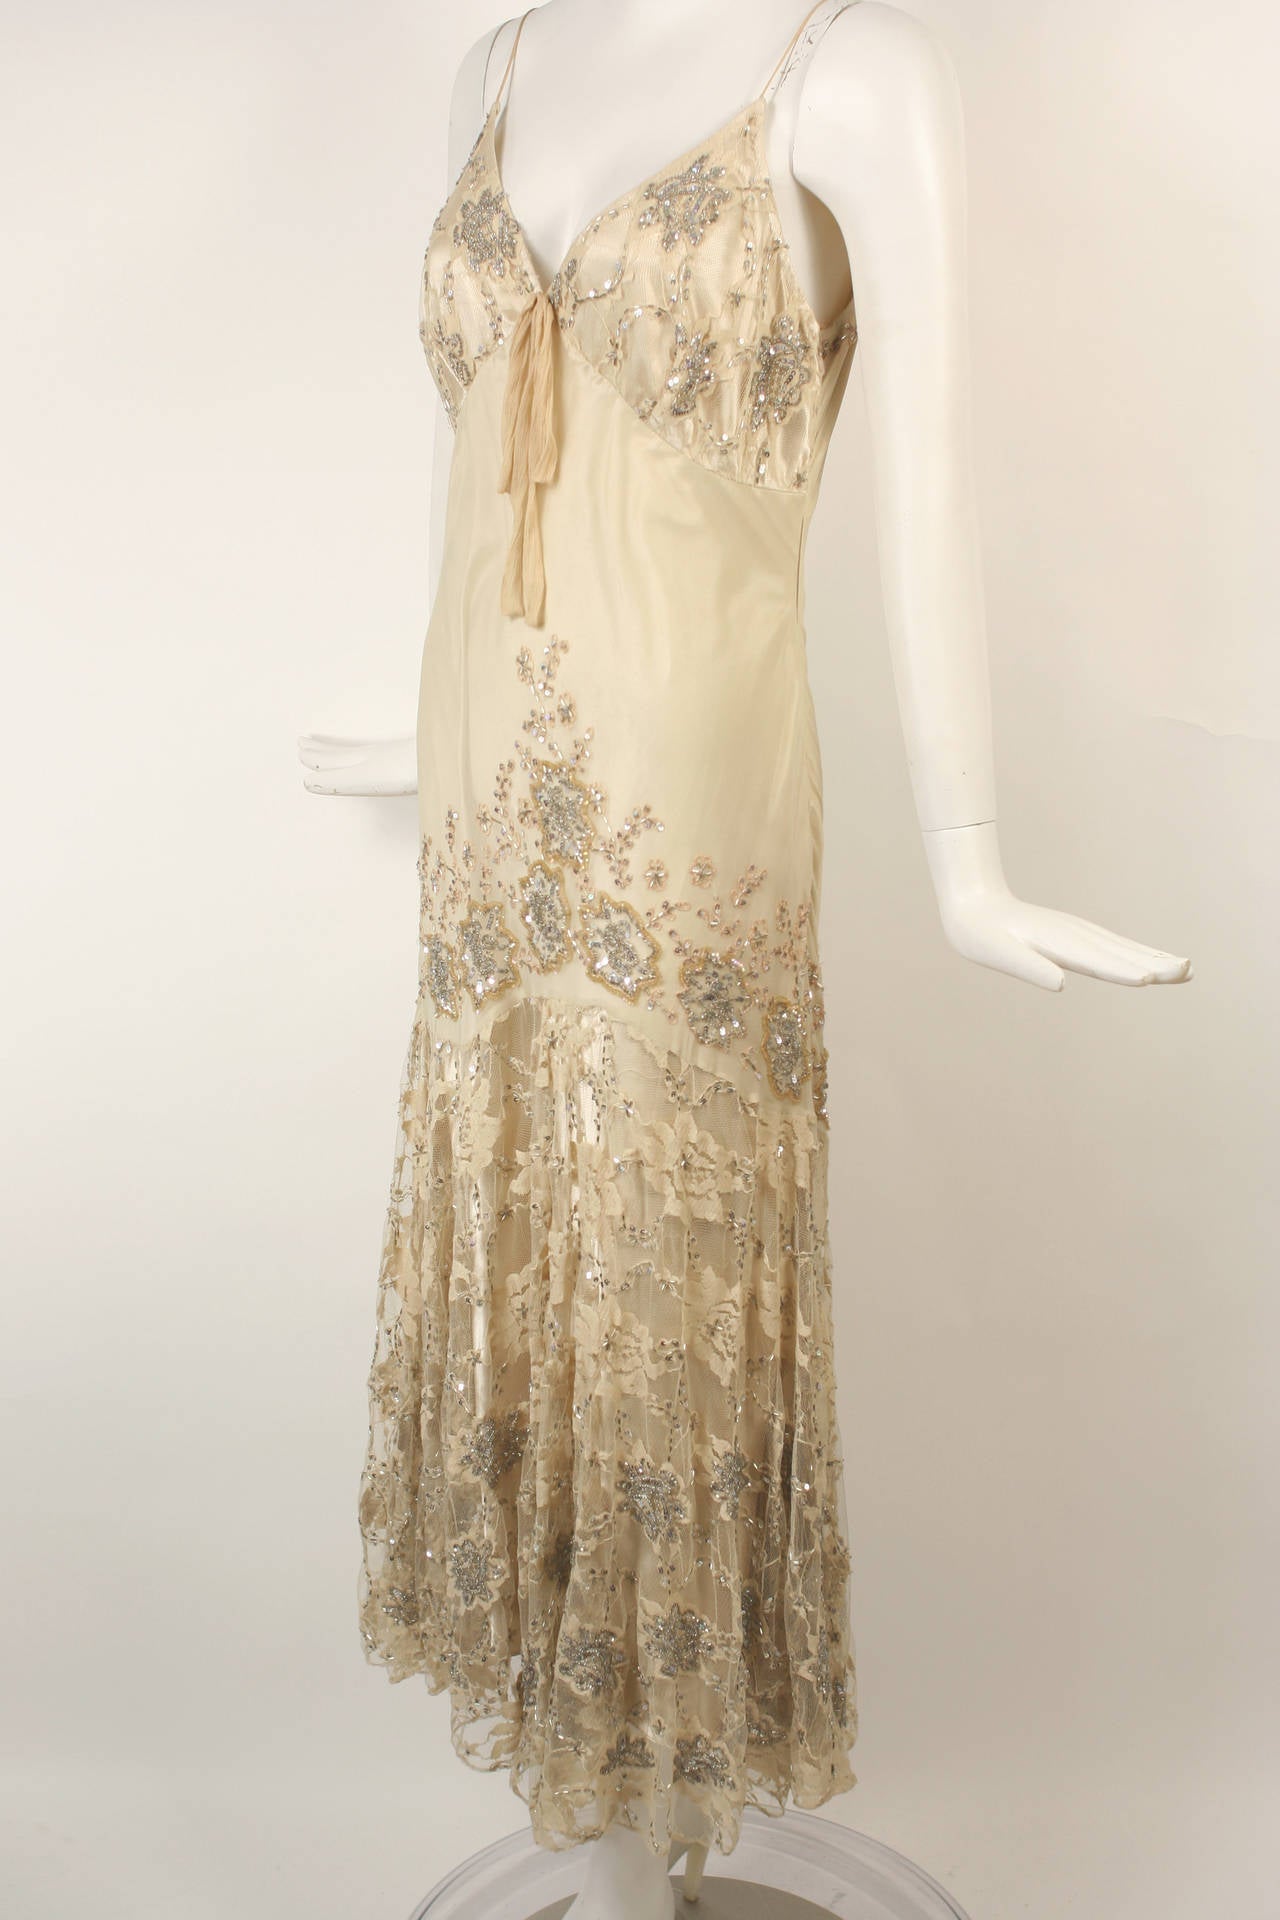 An exquisite gown by Valentino perfect for a special occasion. Vintage 1930 style cut with beading and sequins. Ivory/off white color. Bottom half of skirt made of beaded lace. This gown is cut on the bias therefore it could fit small through medium